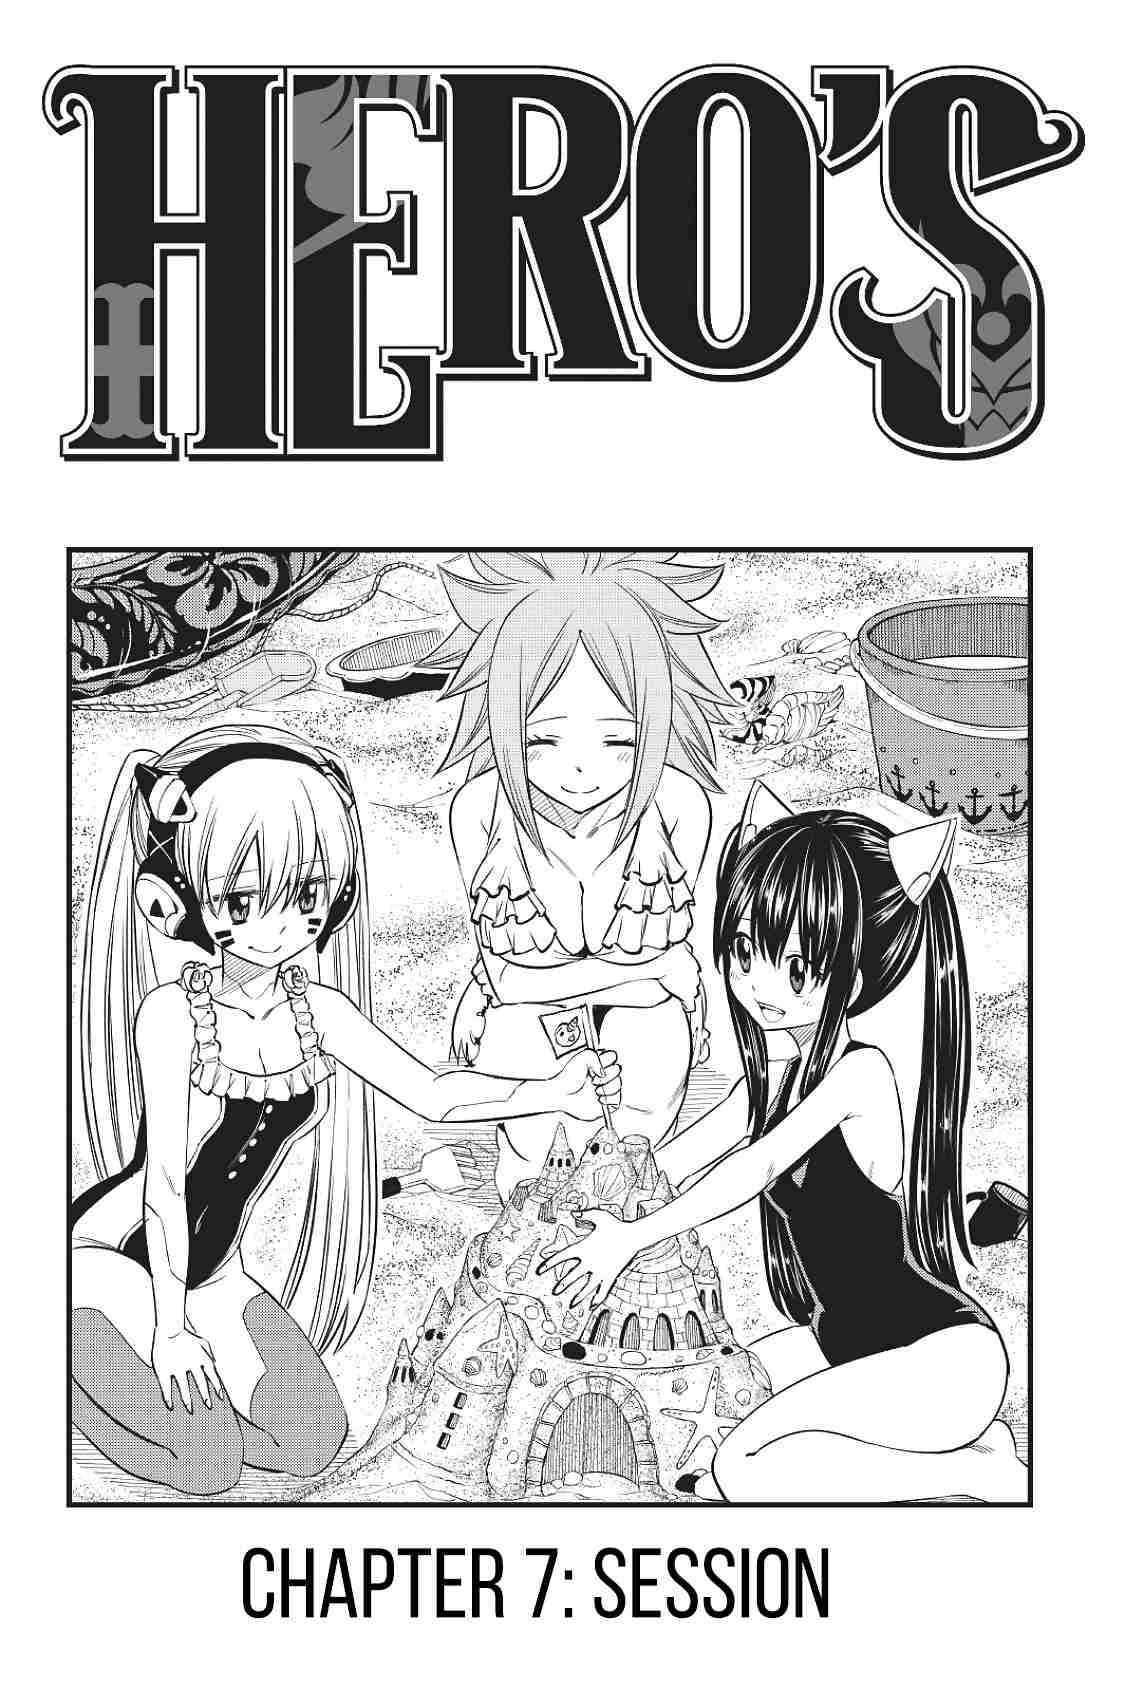 Hero's Ch. 7 Session